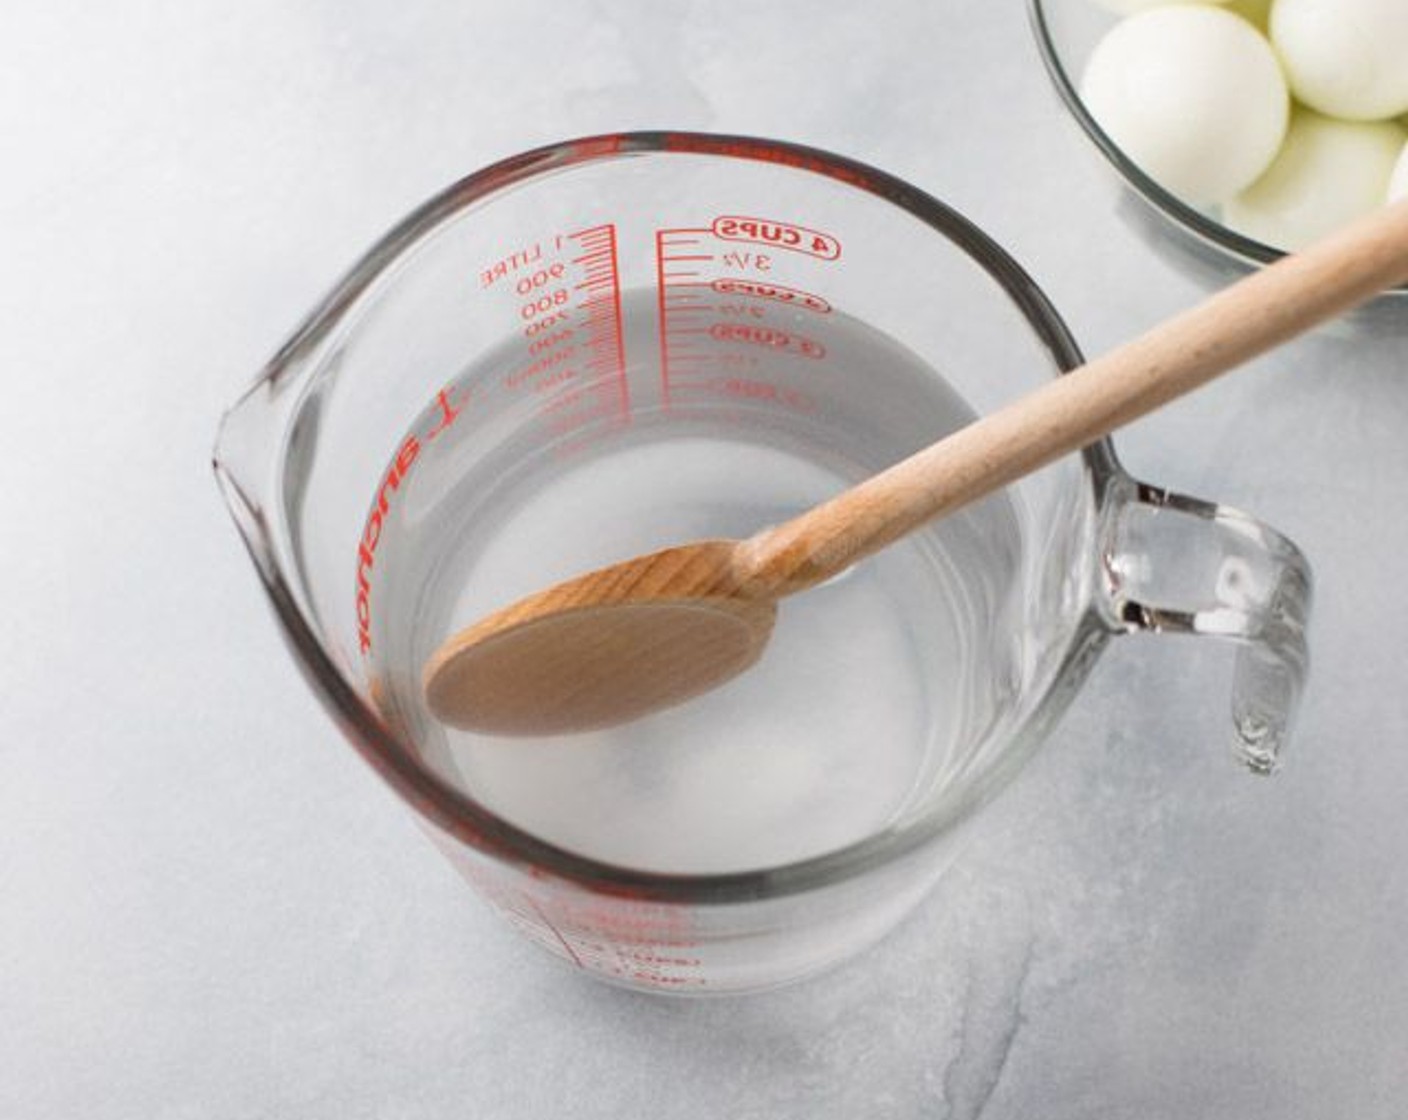 step 2 Combine together the Distilled White Vinegar (2 cups), Water (1 cup), Granulated Sugar (1/2 cup) and Salt (1 Tbsp). You can mix all together in your measuring cup if desired or a bowl. Dissolve this mixture until clear.